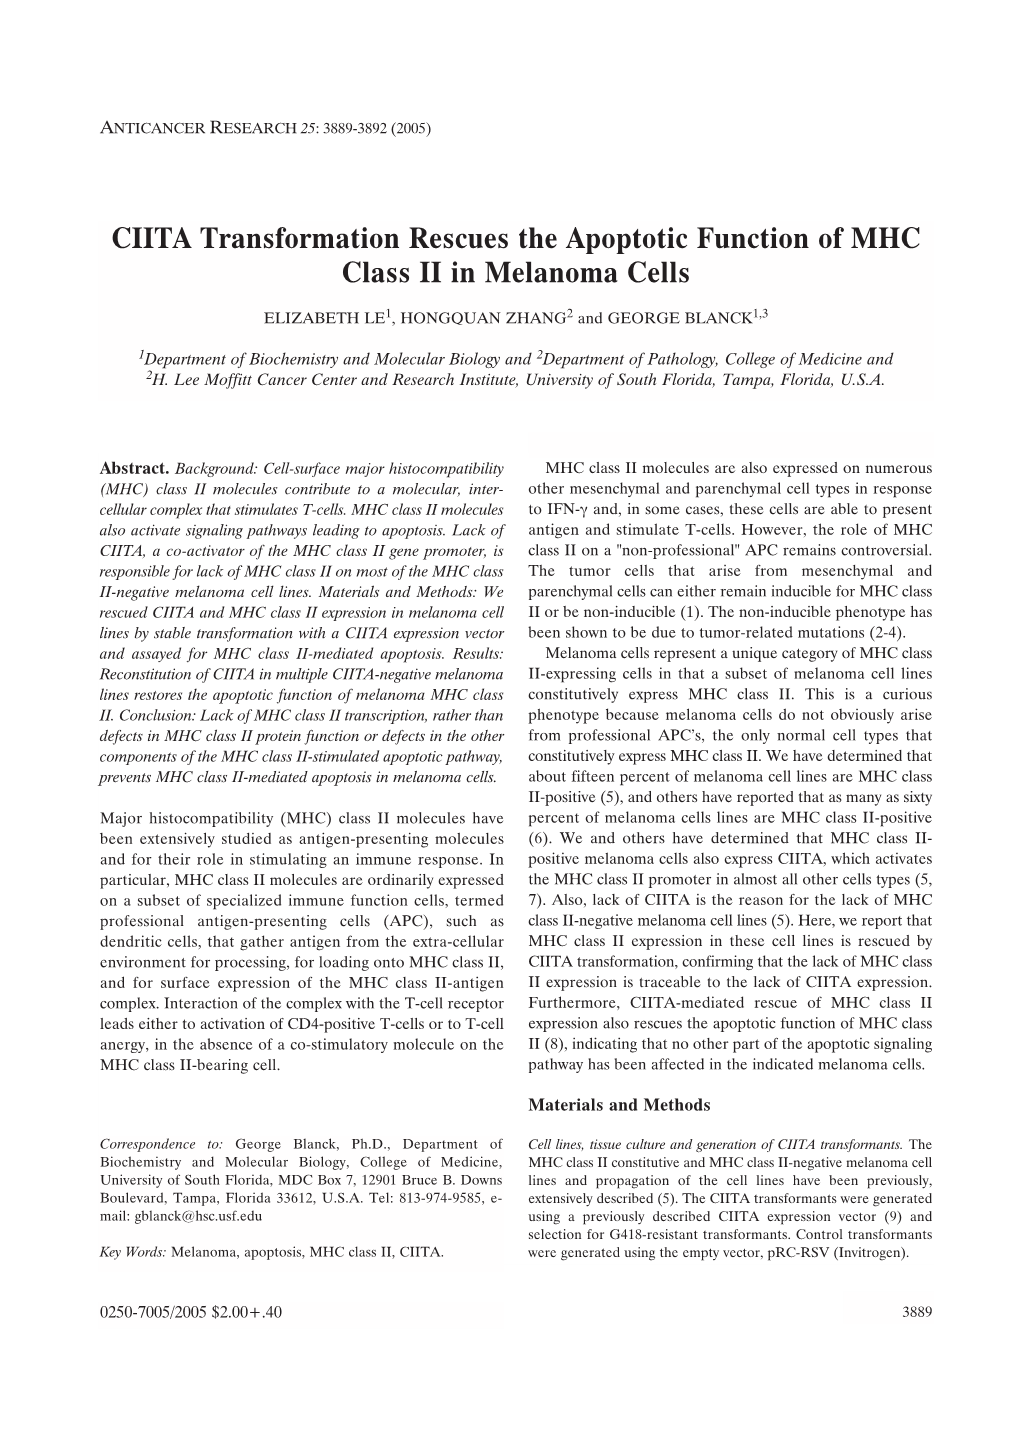 CIITA Transformation Rescues the Apoptotic Function of MHC Class II in Melanoma Cells